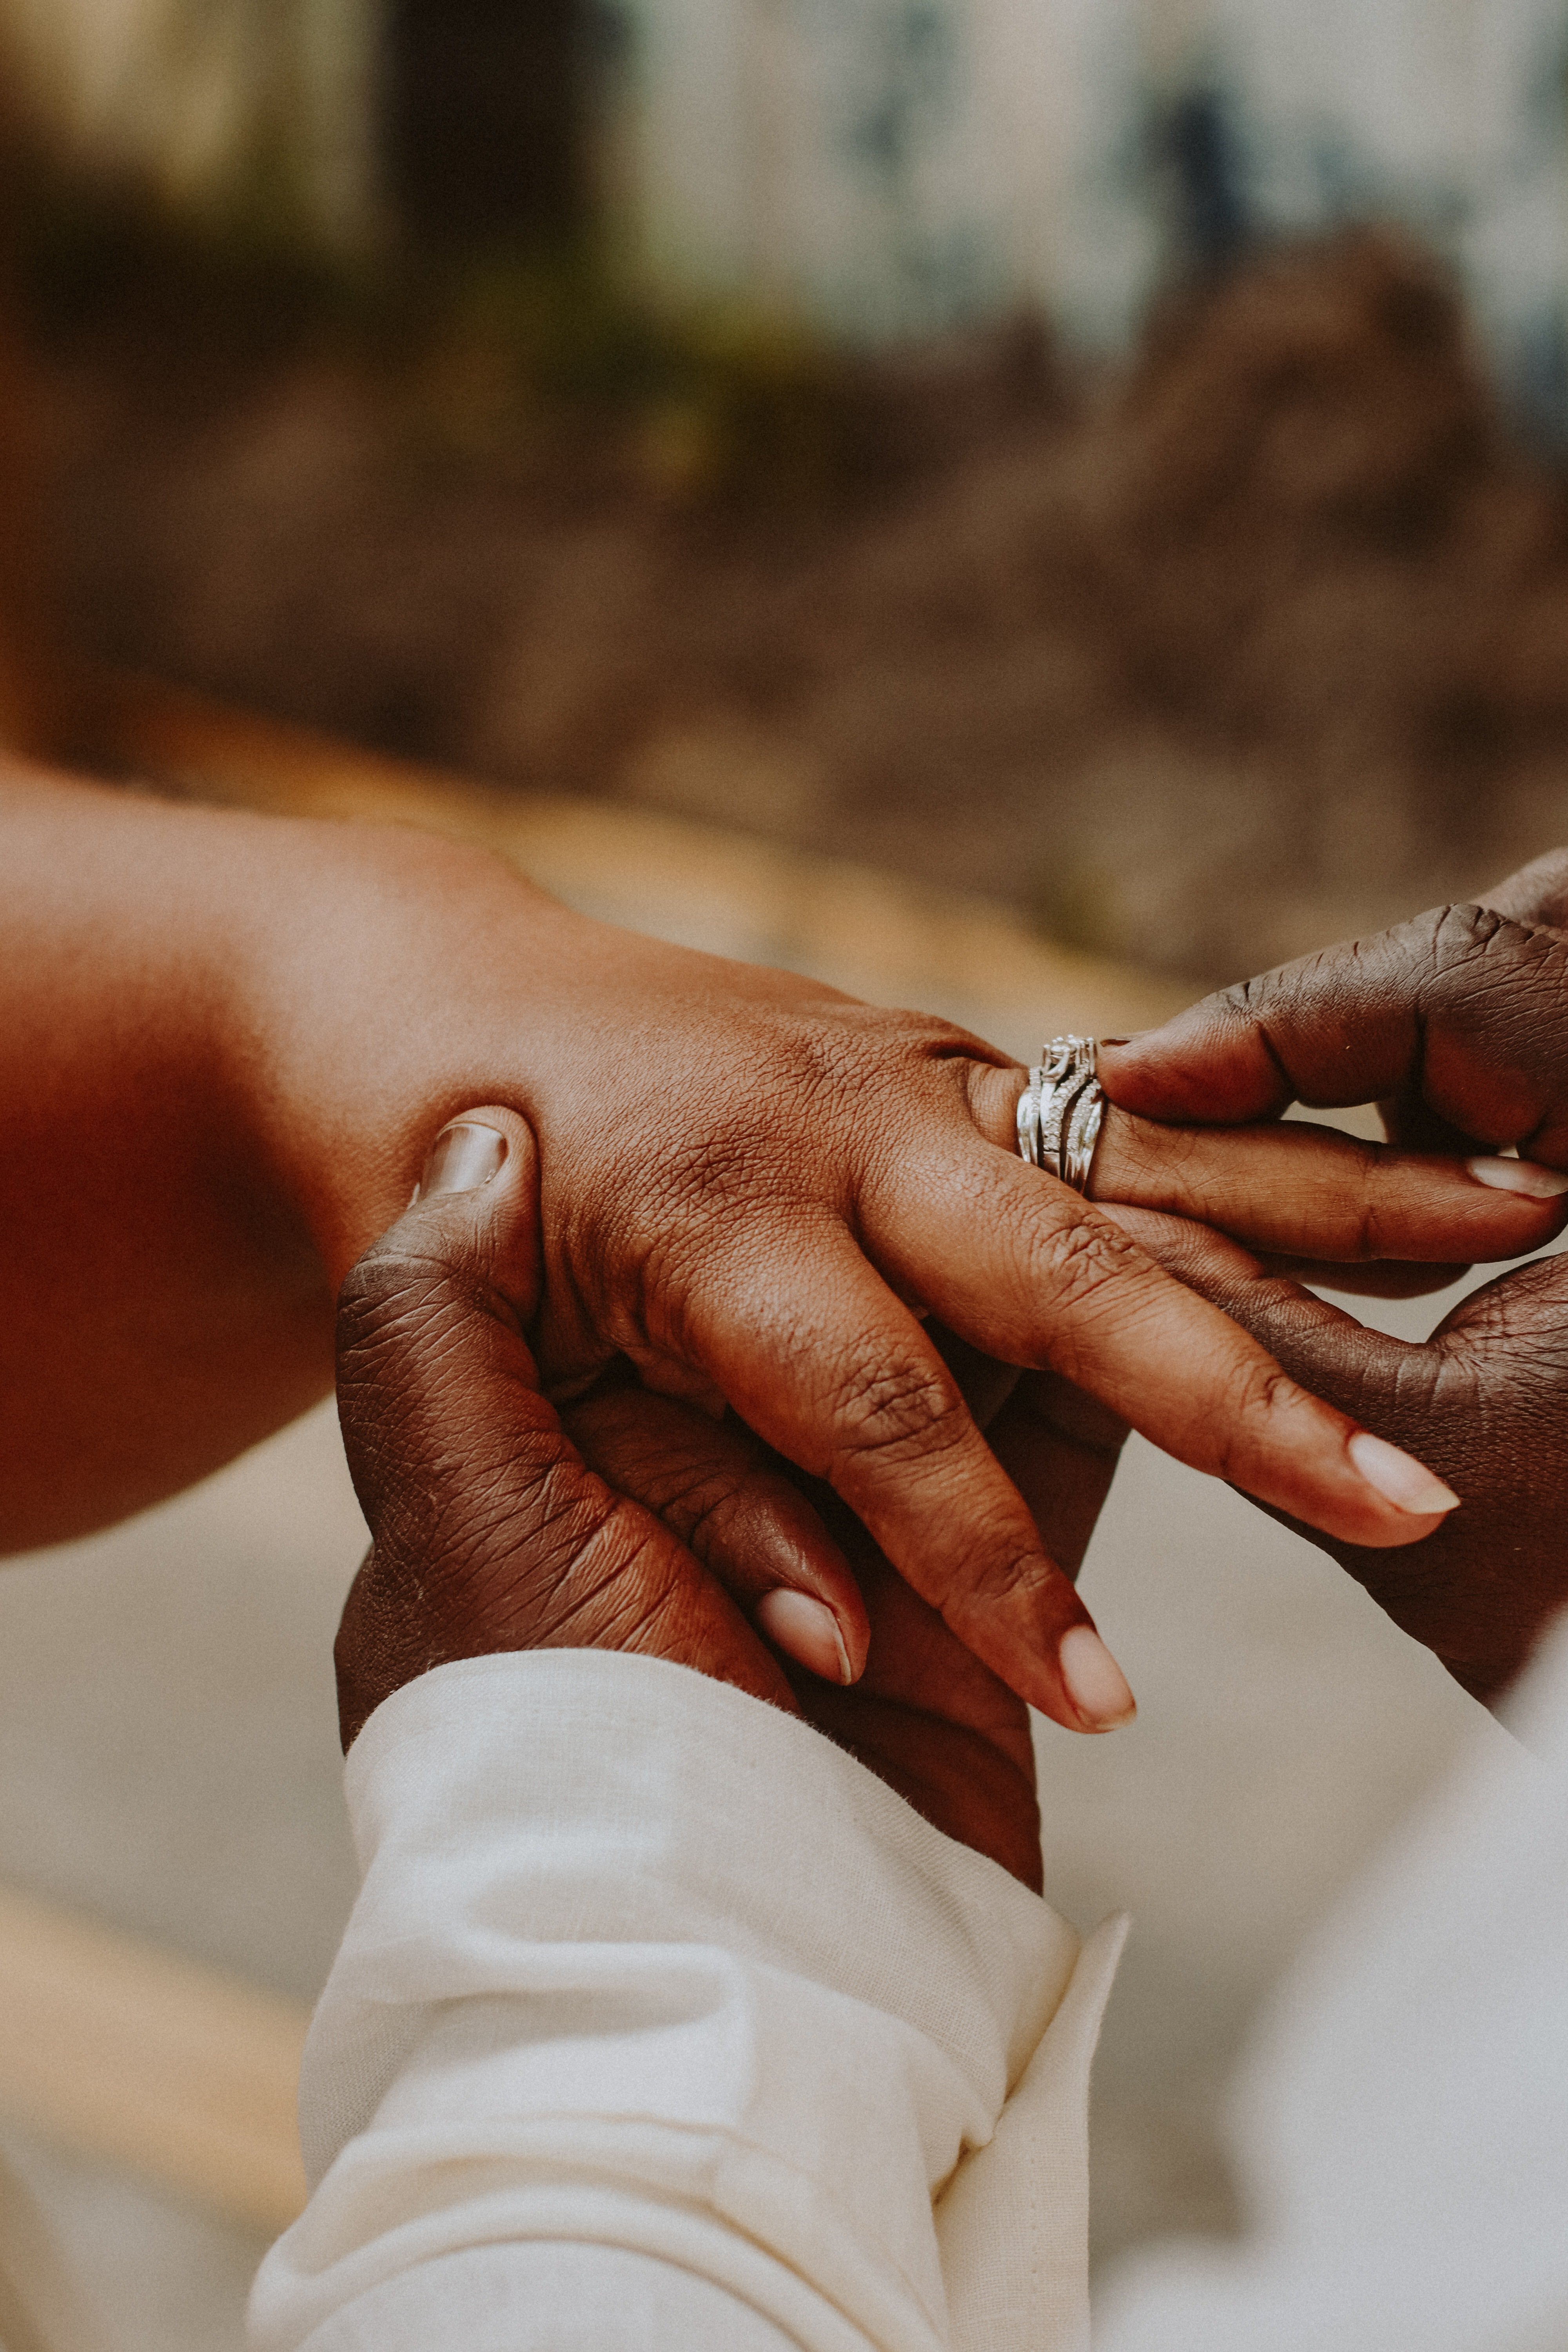 An image of an close shot of a couple getting married | Source: Unsplash